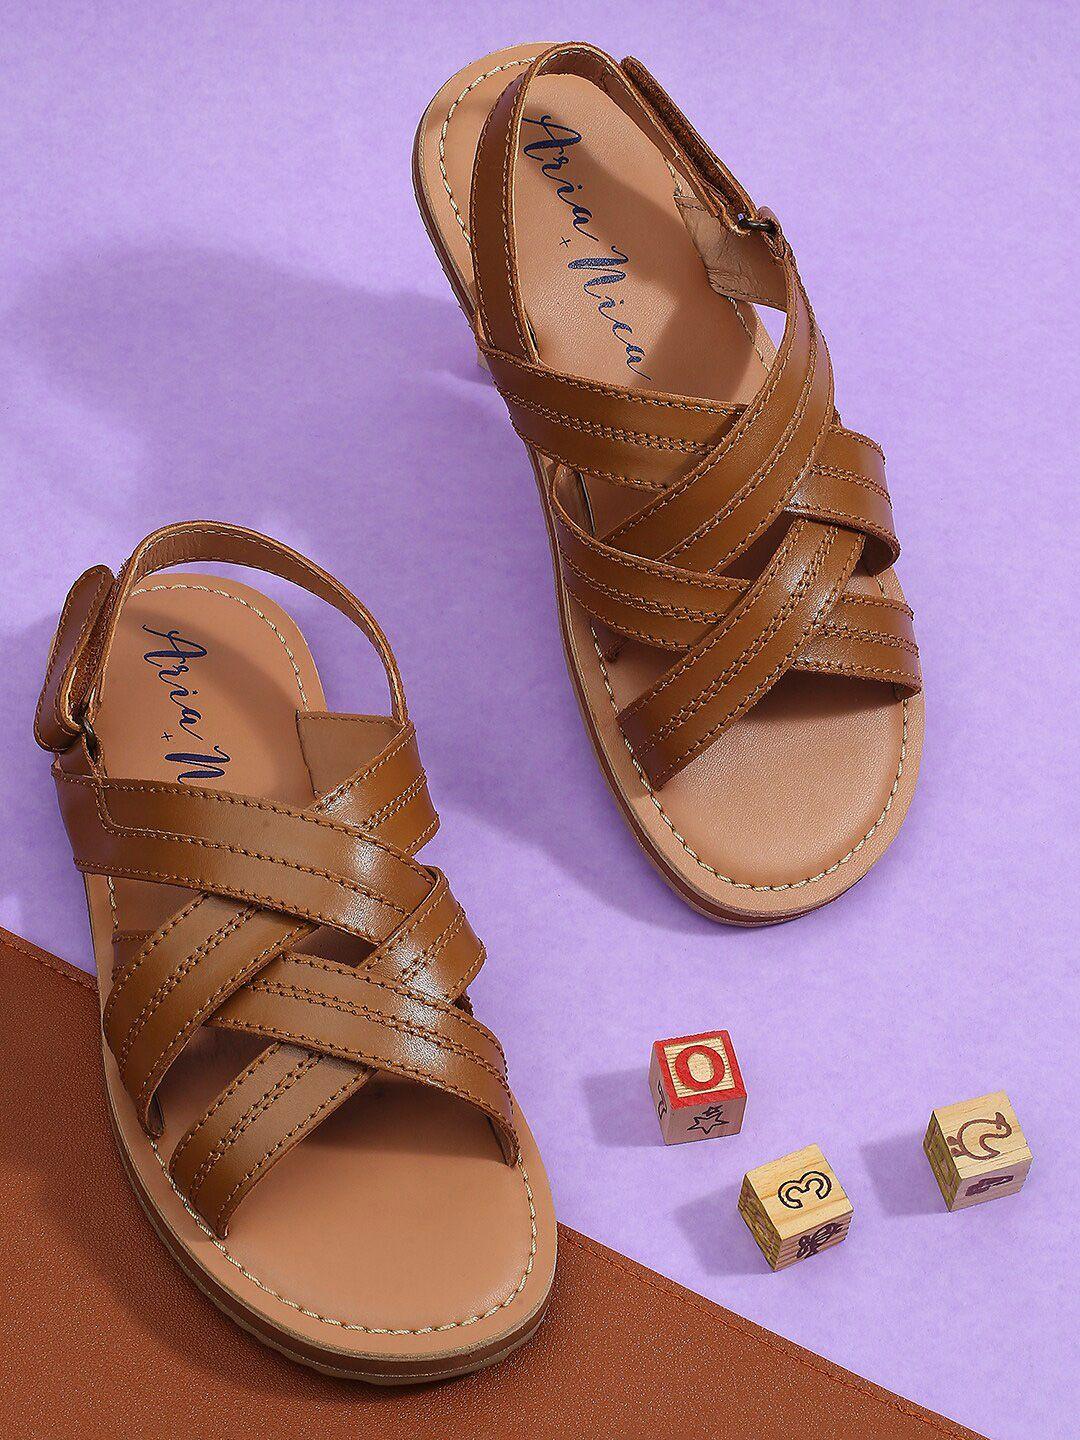 aria nica boys criss cross strap leather comfort sandals